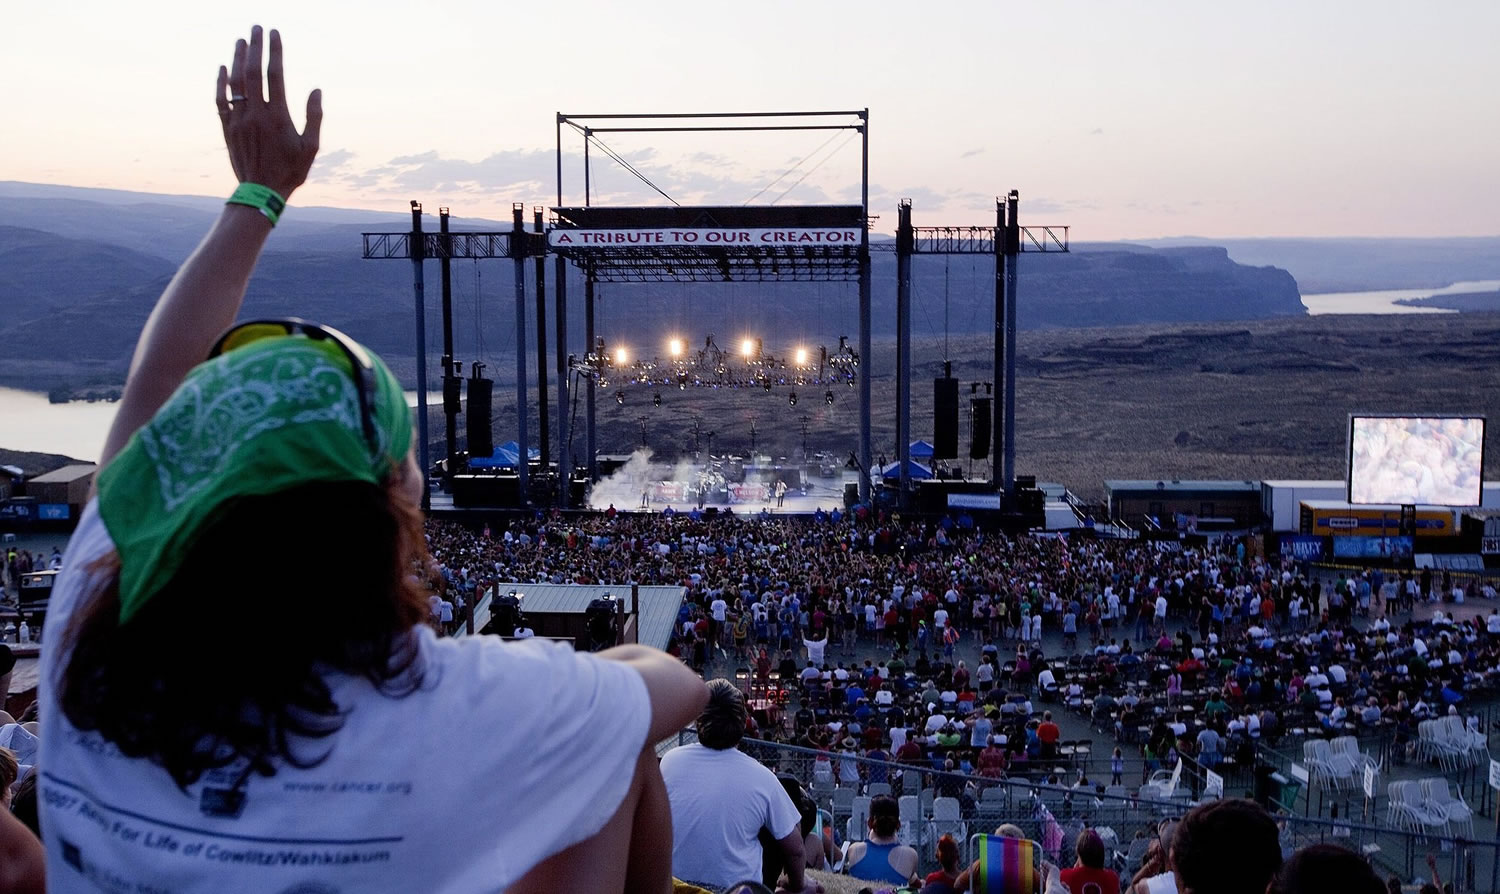 The company that runs Gorge Amphitheater near Quincy, Life Nation, wants to add more camping space, restaurants and cabins.